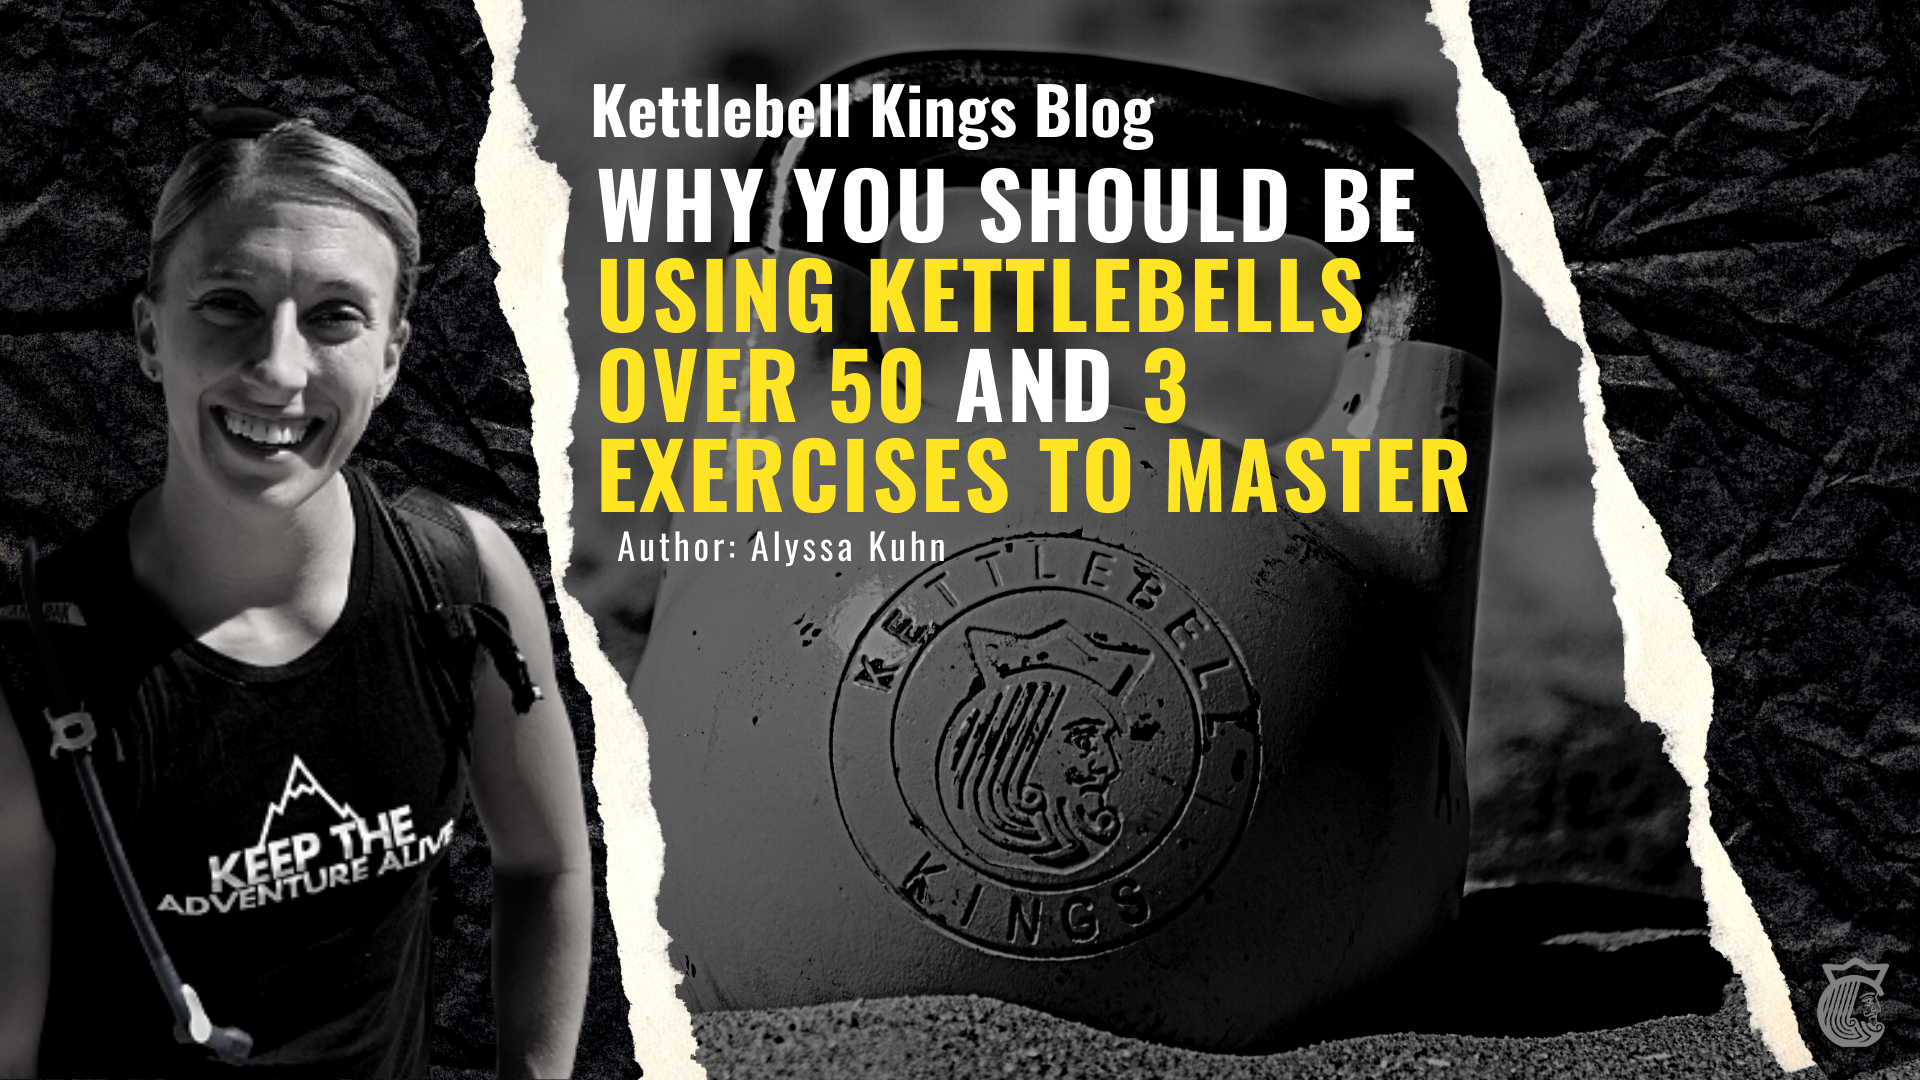 Why You Should Be Using Kettlebells Over 50 and 3 Exercises to Master